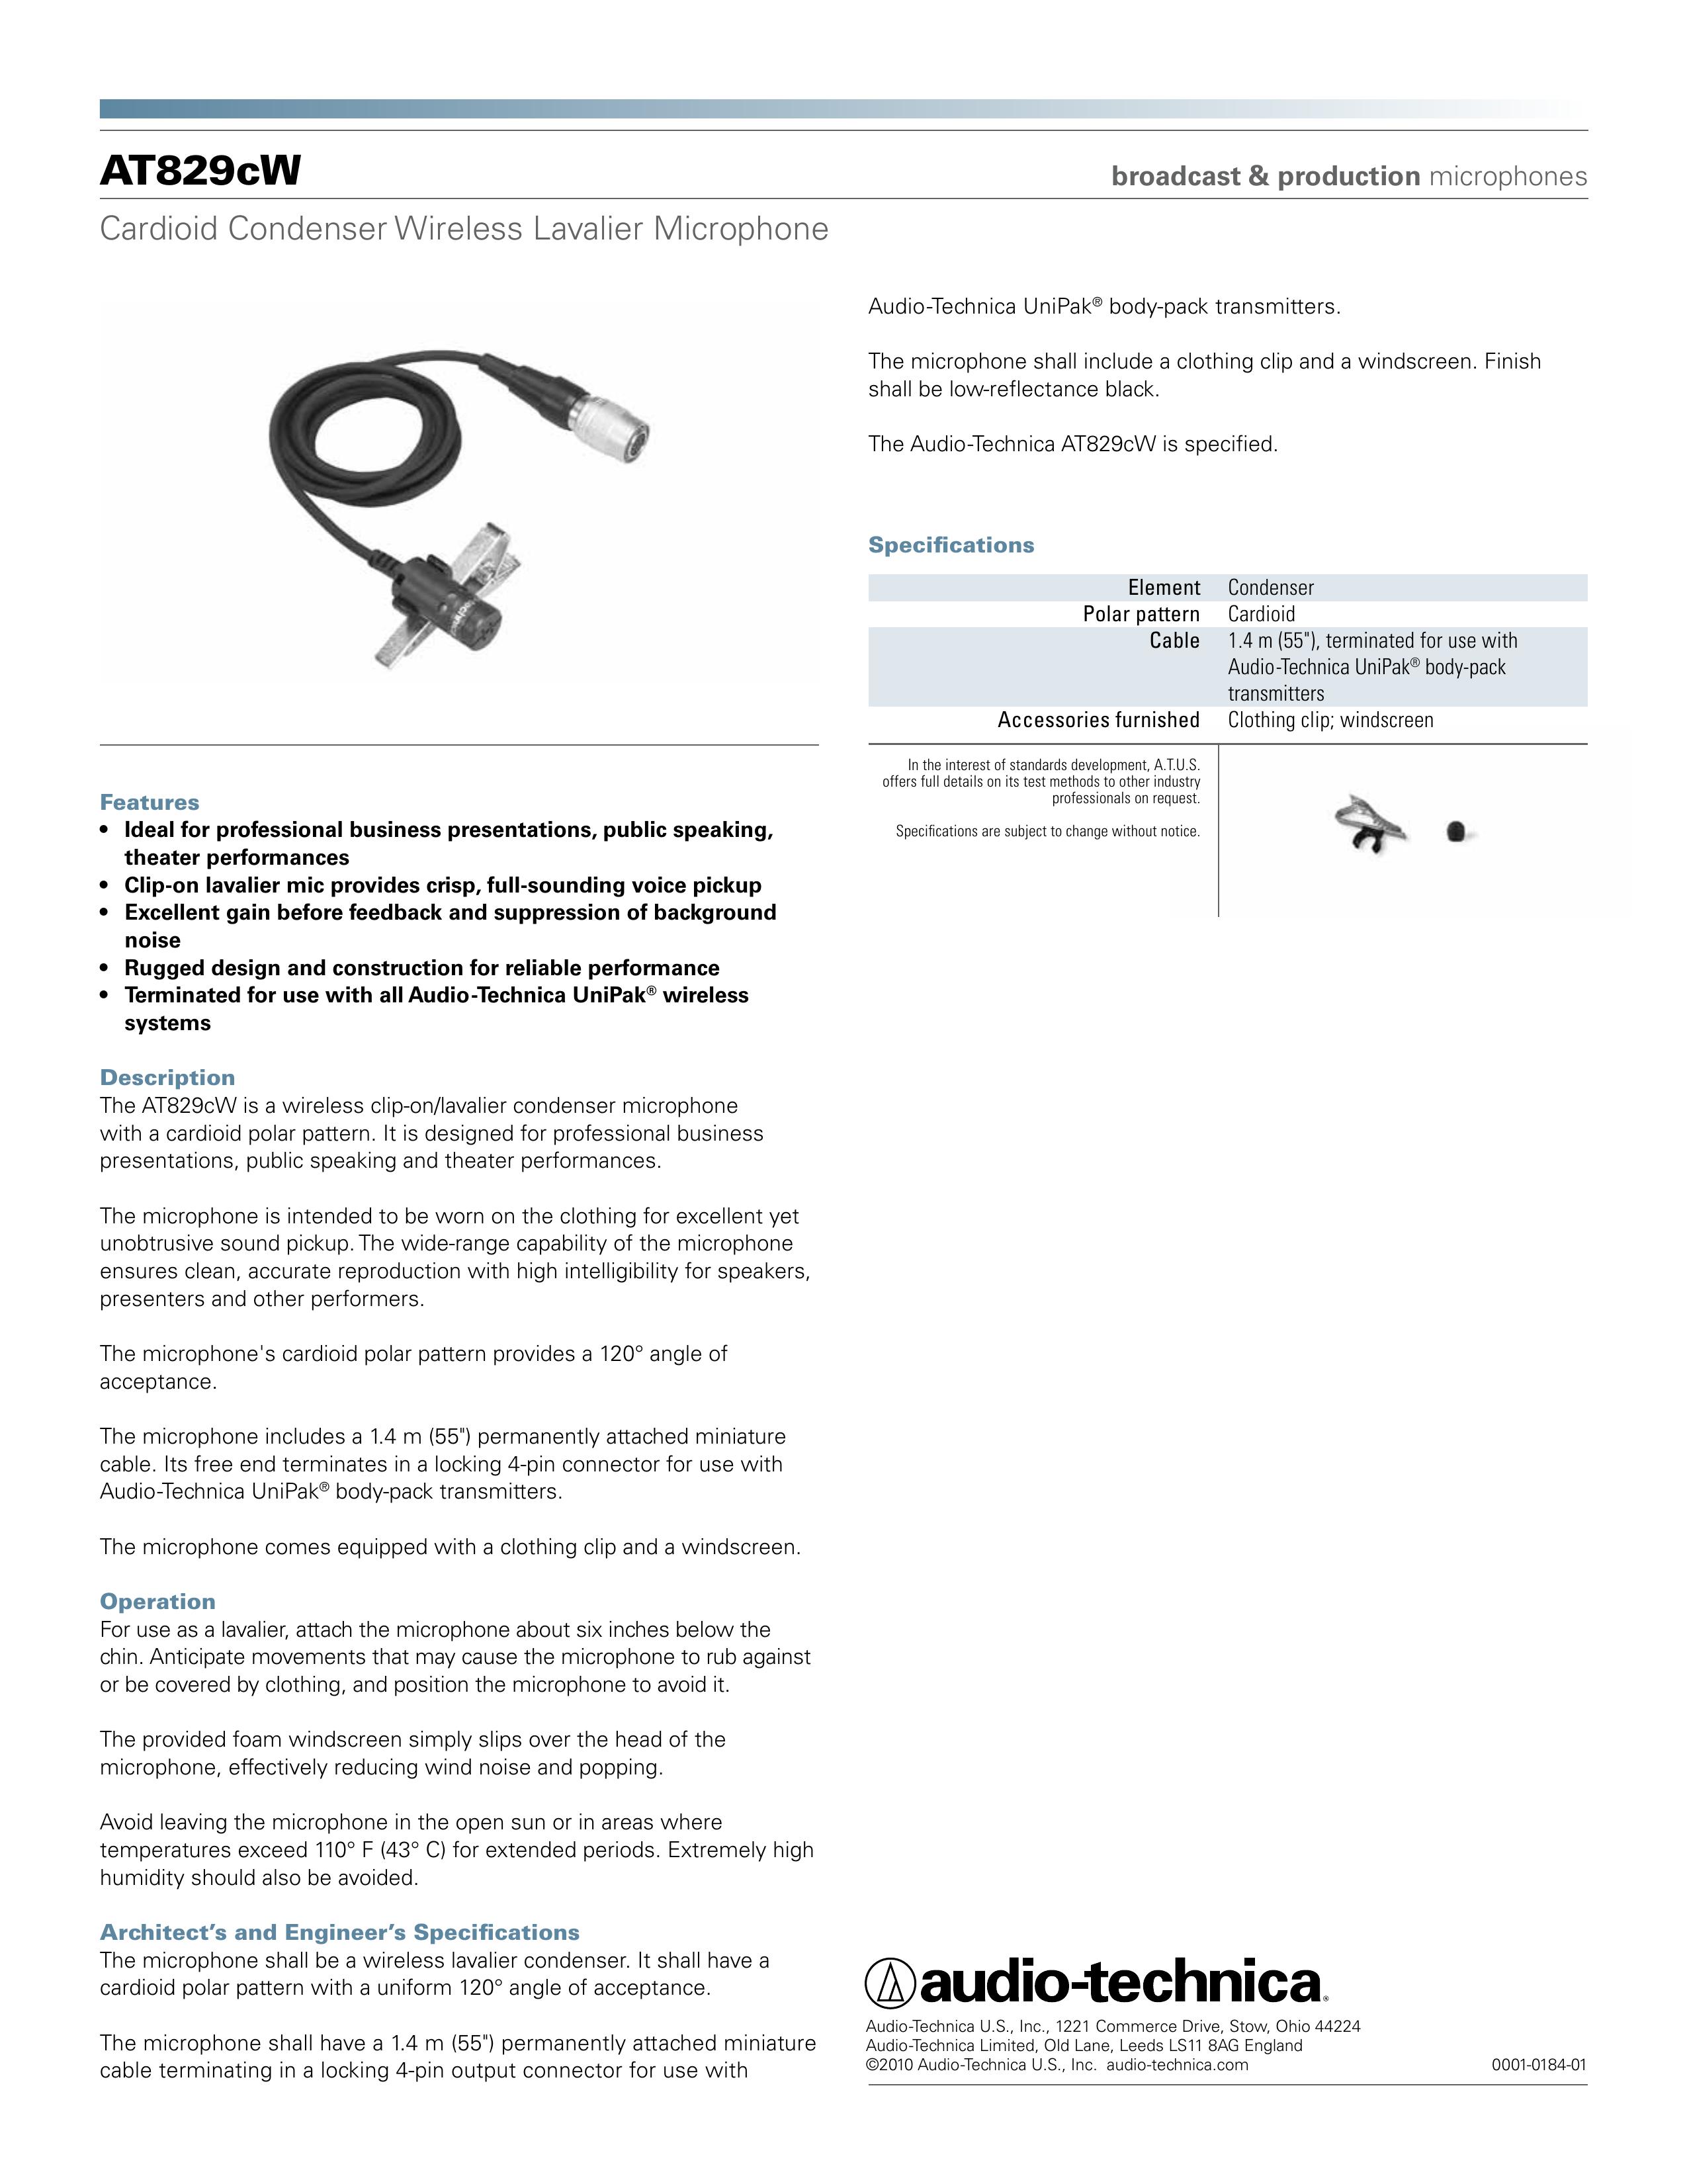 Audio-Technica AT829cW Microphone User Manual